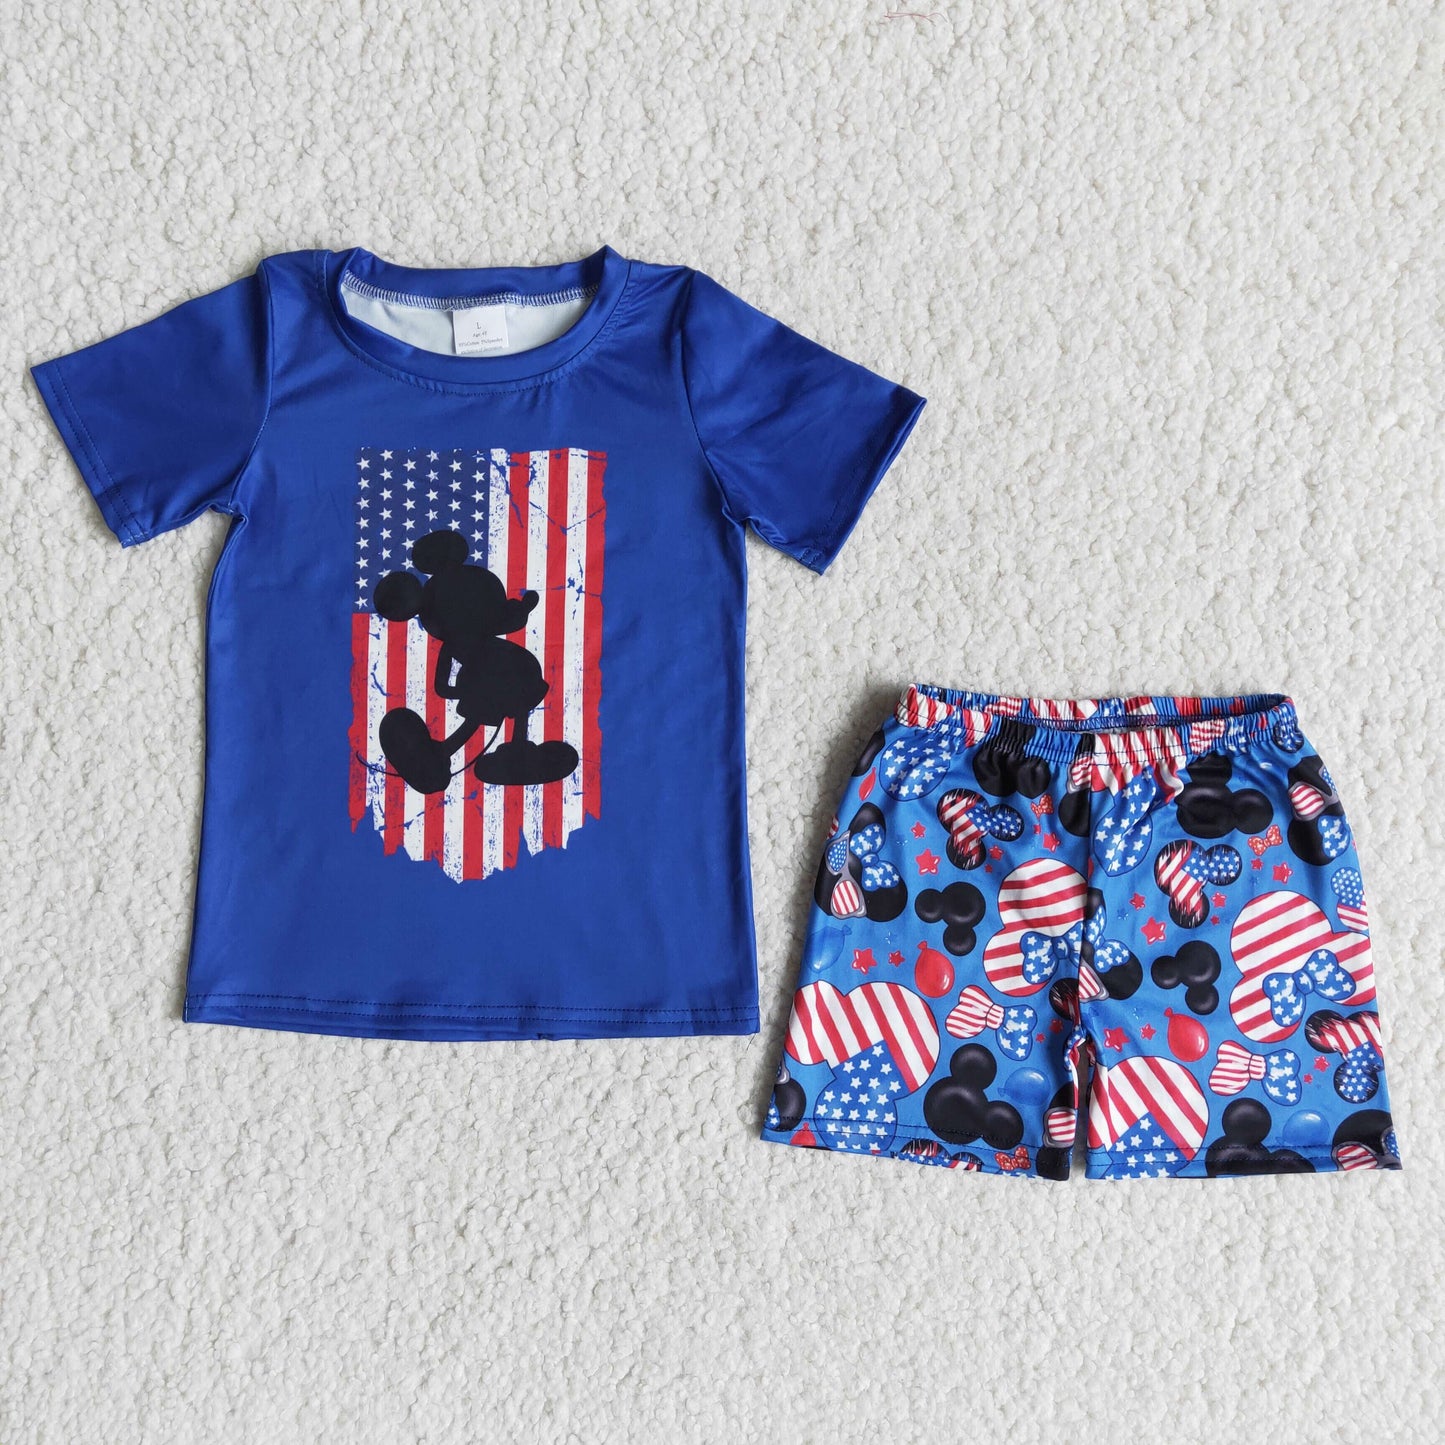 Cute mouse blue short sleeve shirt shorts boy 4th of july clothes